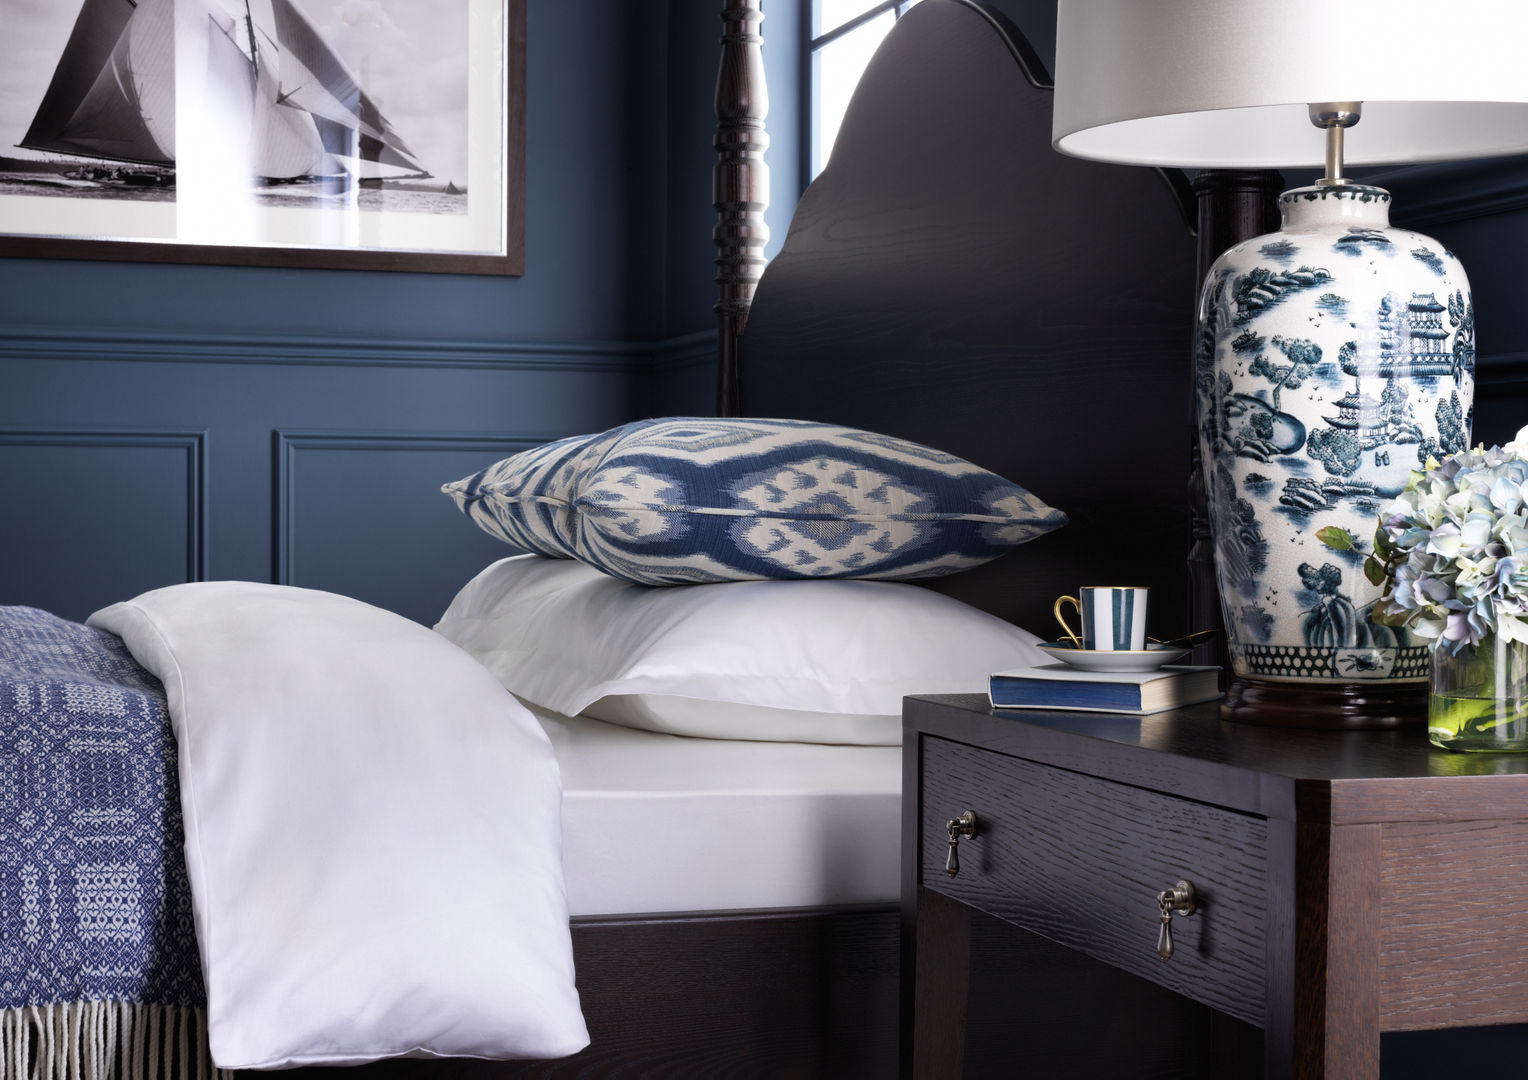 SS16 Style Guide - Coastal Elegance - Bedroom LuxDeco Спальня country,bedroom,blue,bedside table